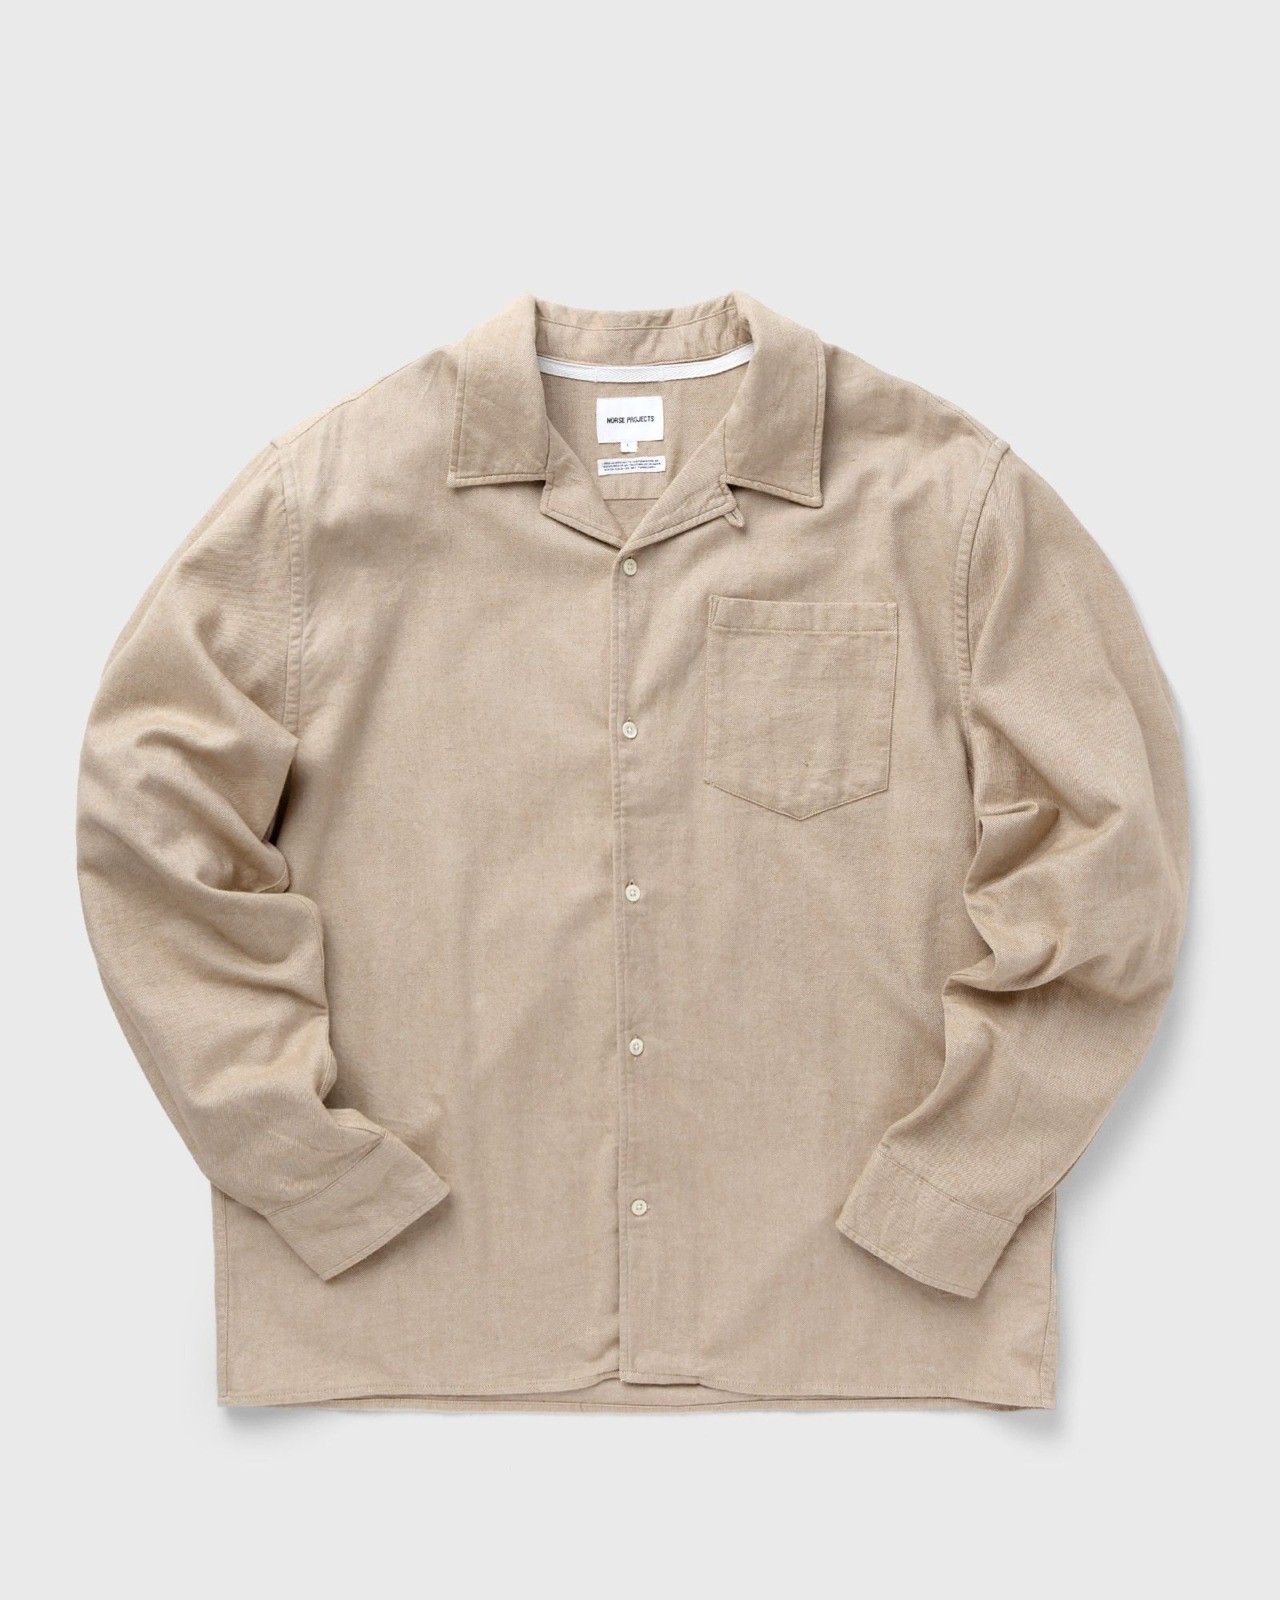 Man Shirt in Beige Bstn - Norse Projects GOOFASH